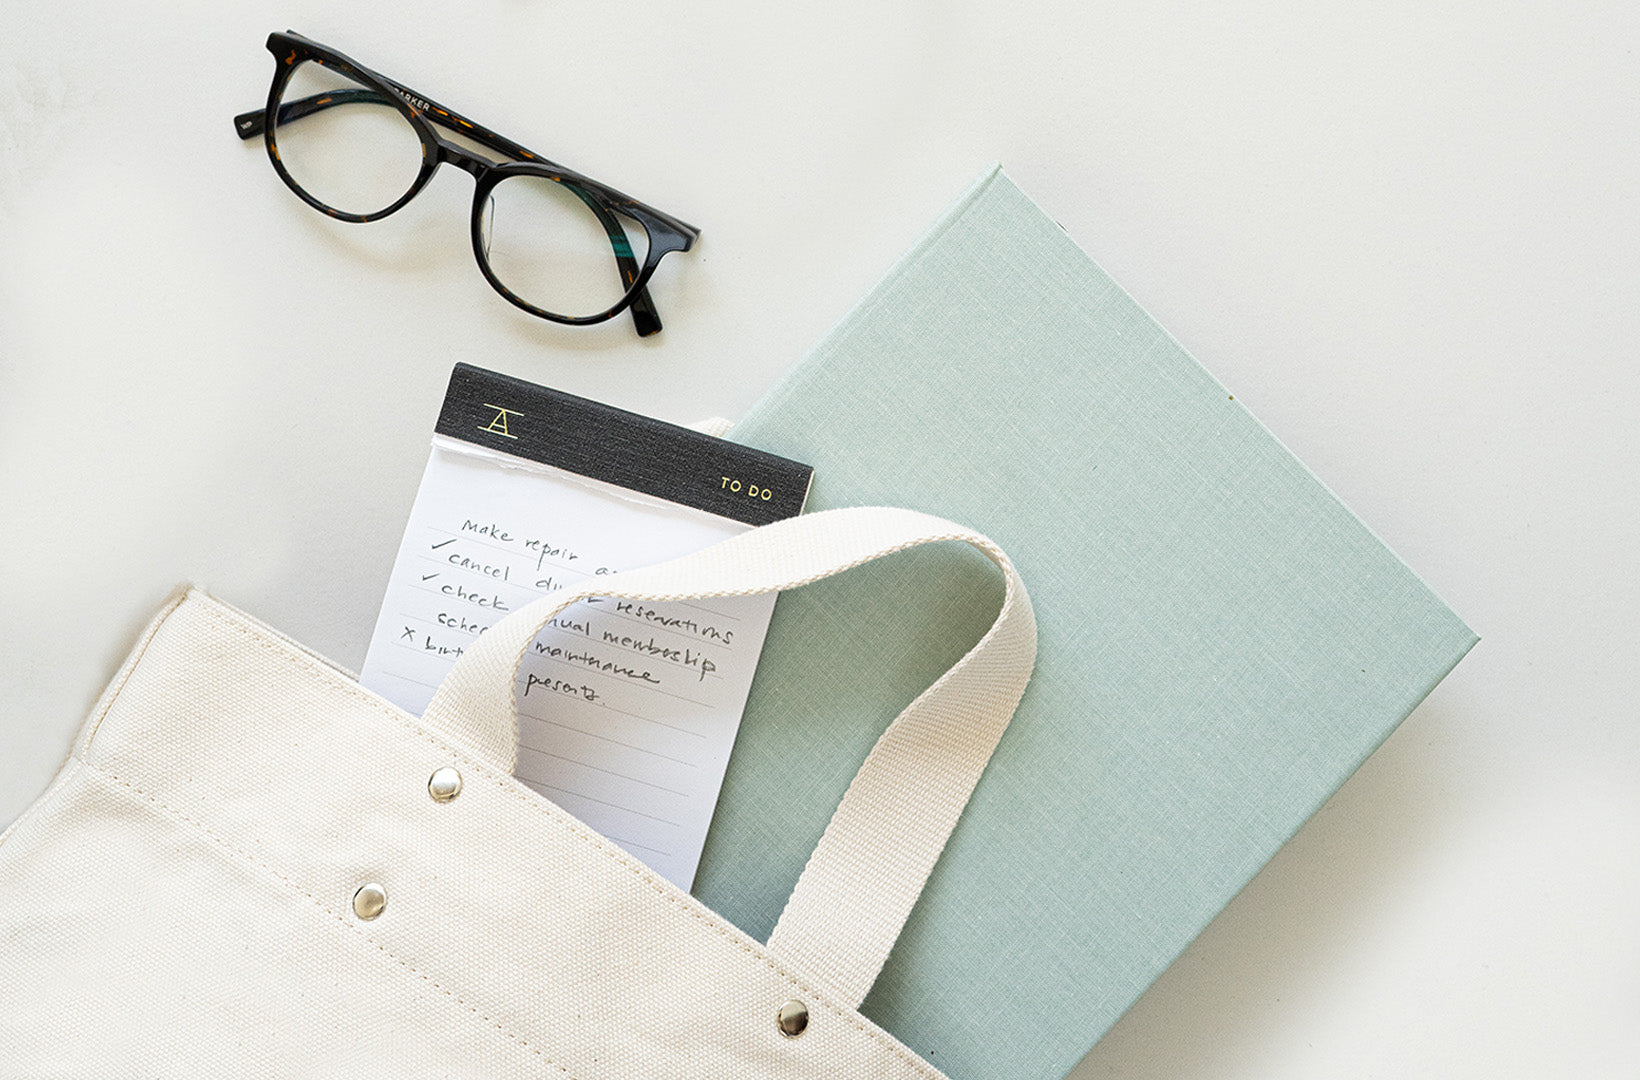 A canvas tote bag sits against a light gray background with contents spilling out, including the 23-24 compact binder planner, to do pad, and glasses